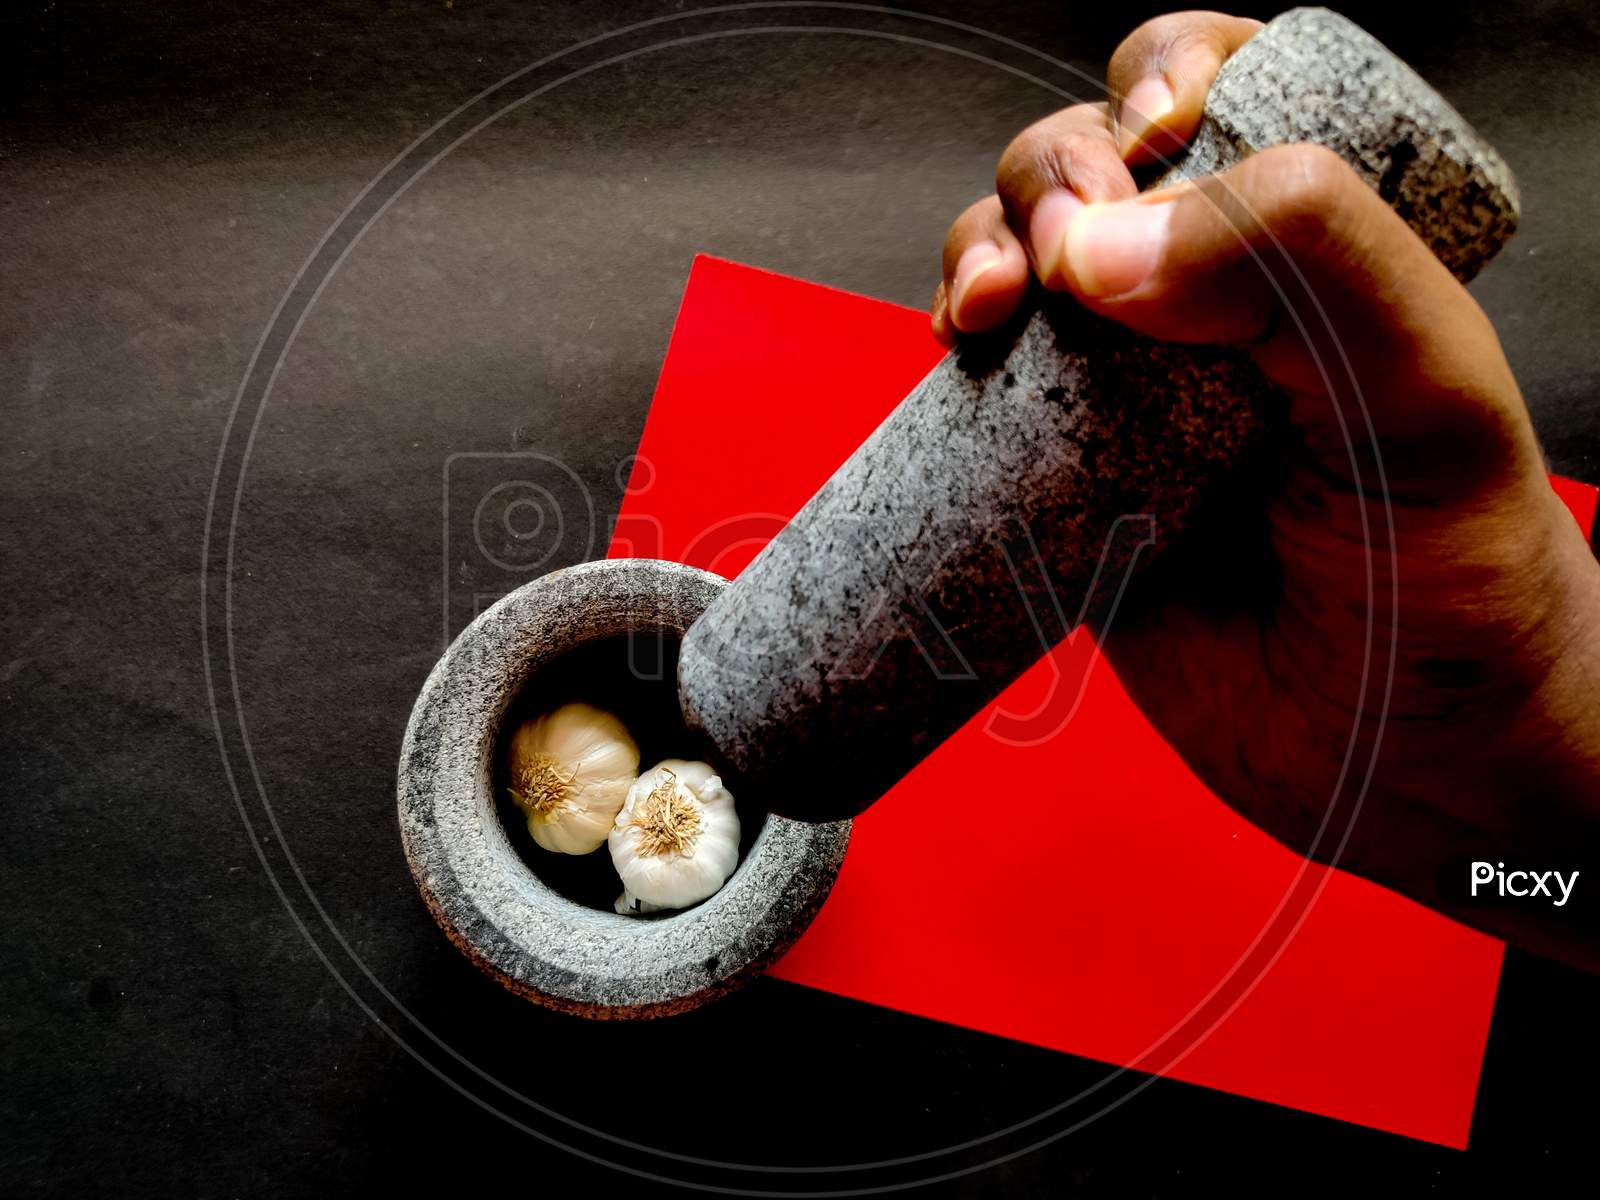 Human Hand Holding Mortar And Ready To Crush The Garlic In Pestle. Isolated On Red And Black Background.